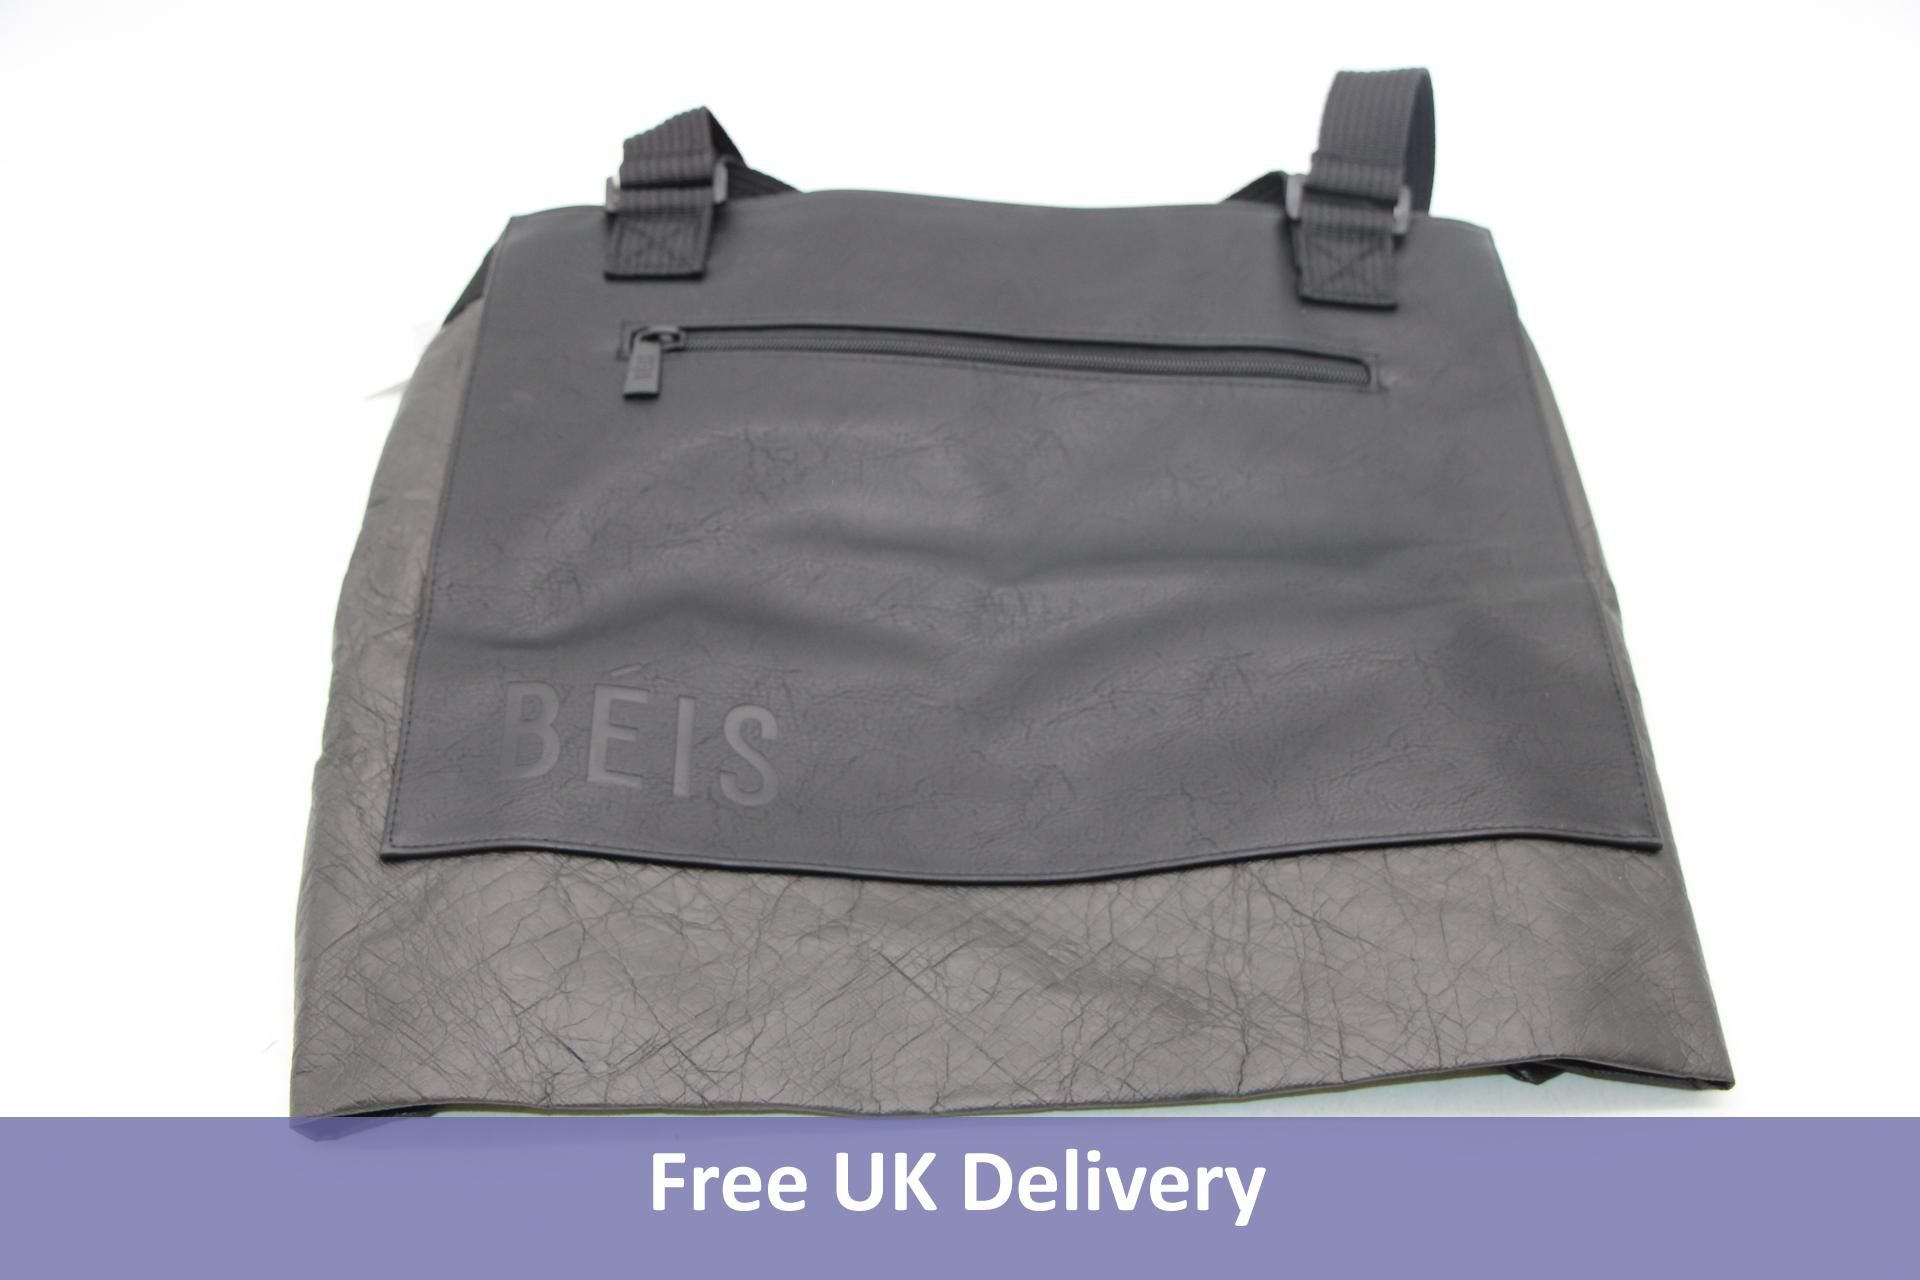 Beis The XL Tote Bag, Black, Width 32" Height 16" Depth 13.5"